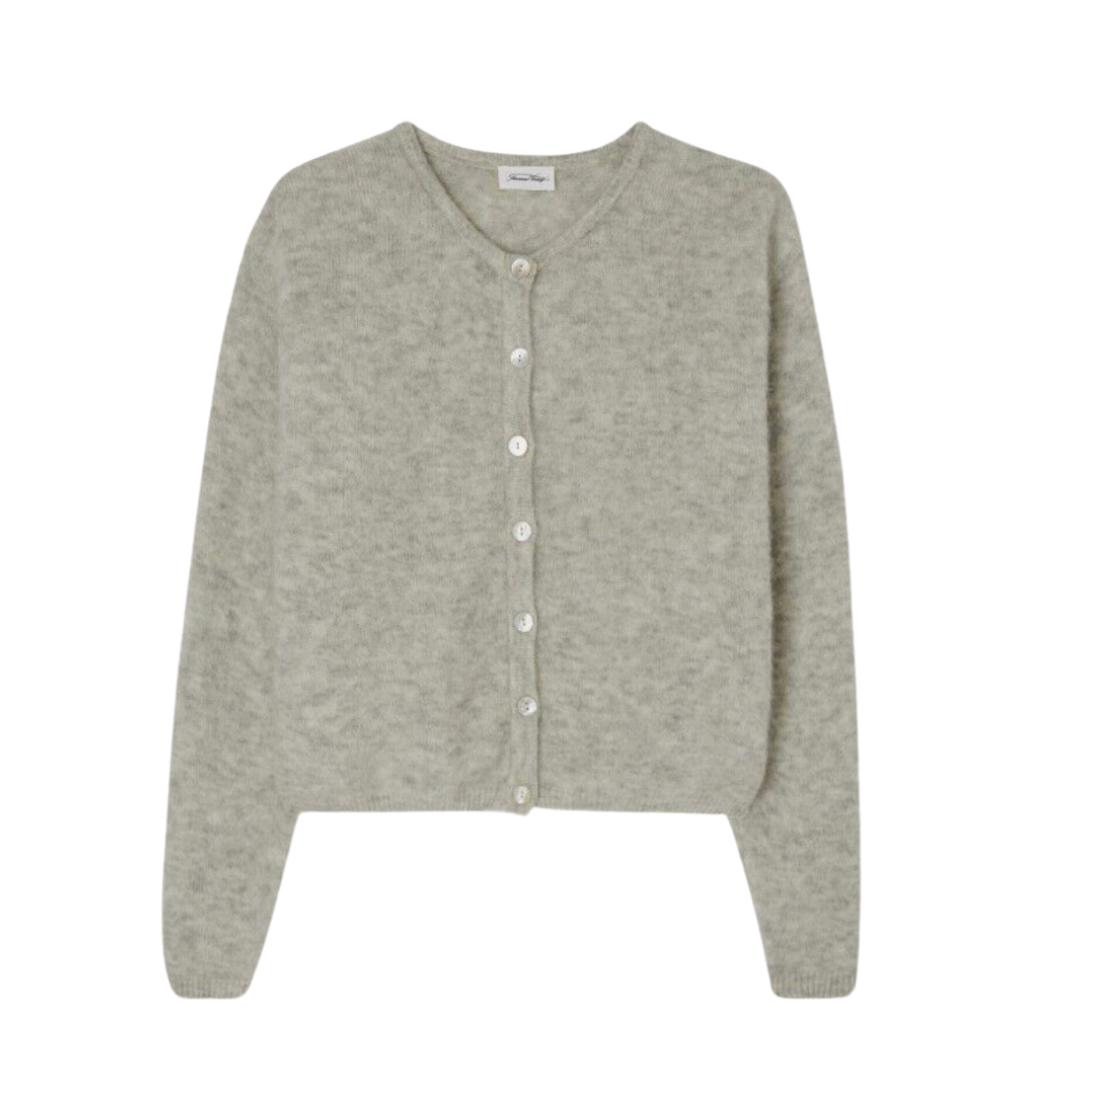 American Vintage Vitow Cardigan Heather grey - buy it now online in the UK from Stripesfashion